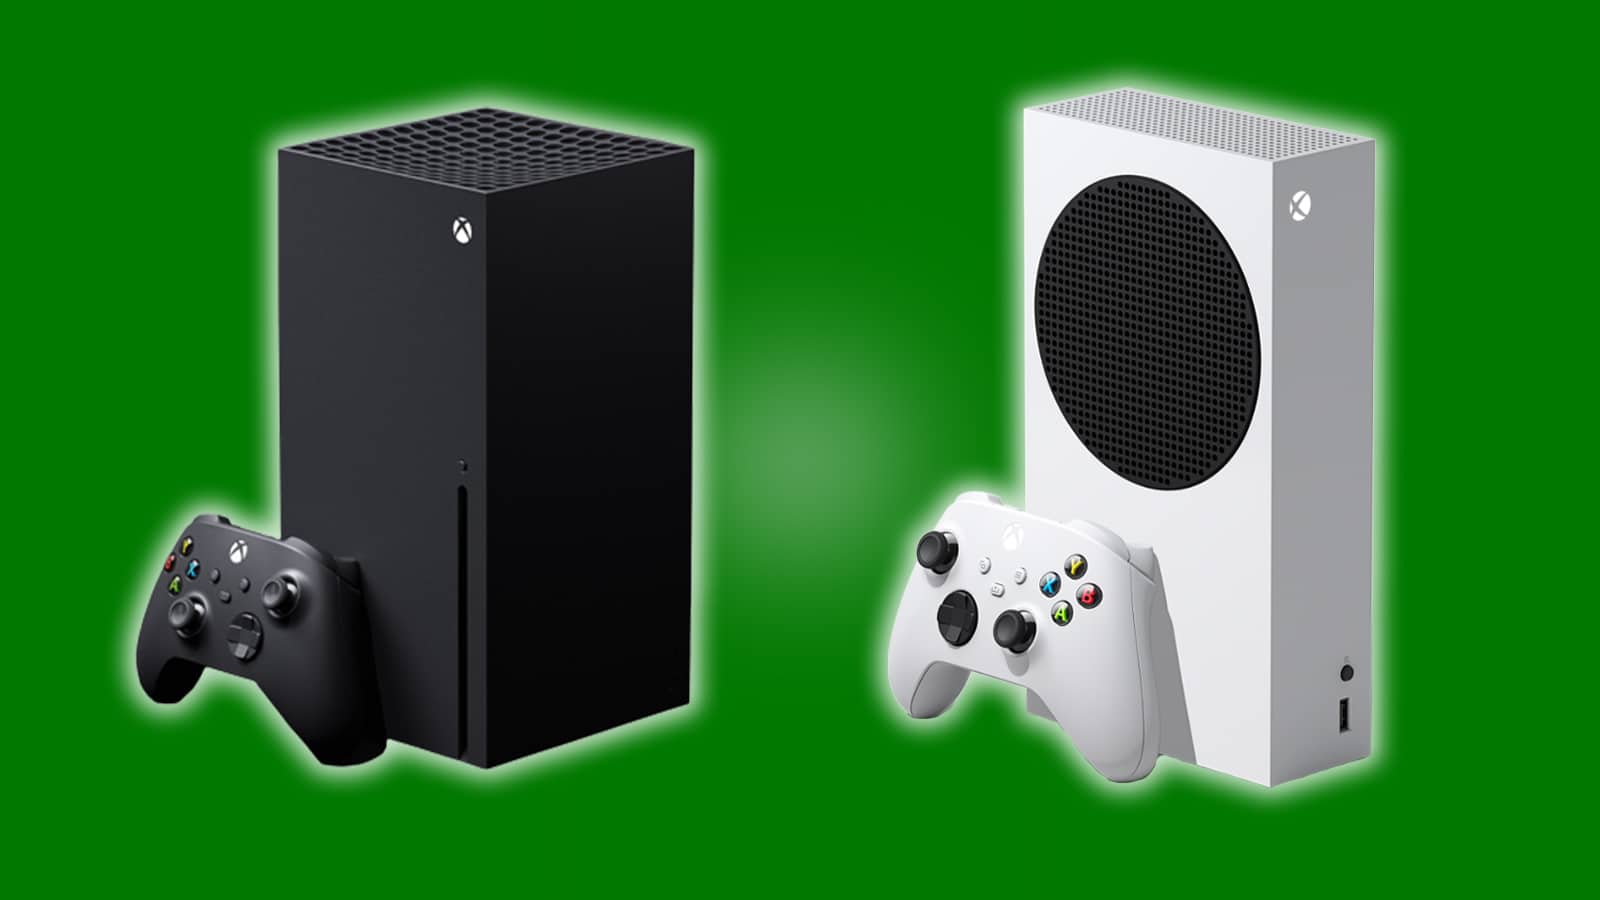 How to share games and Game Pass on Xbox One and Xbox Series X